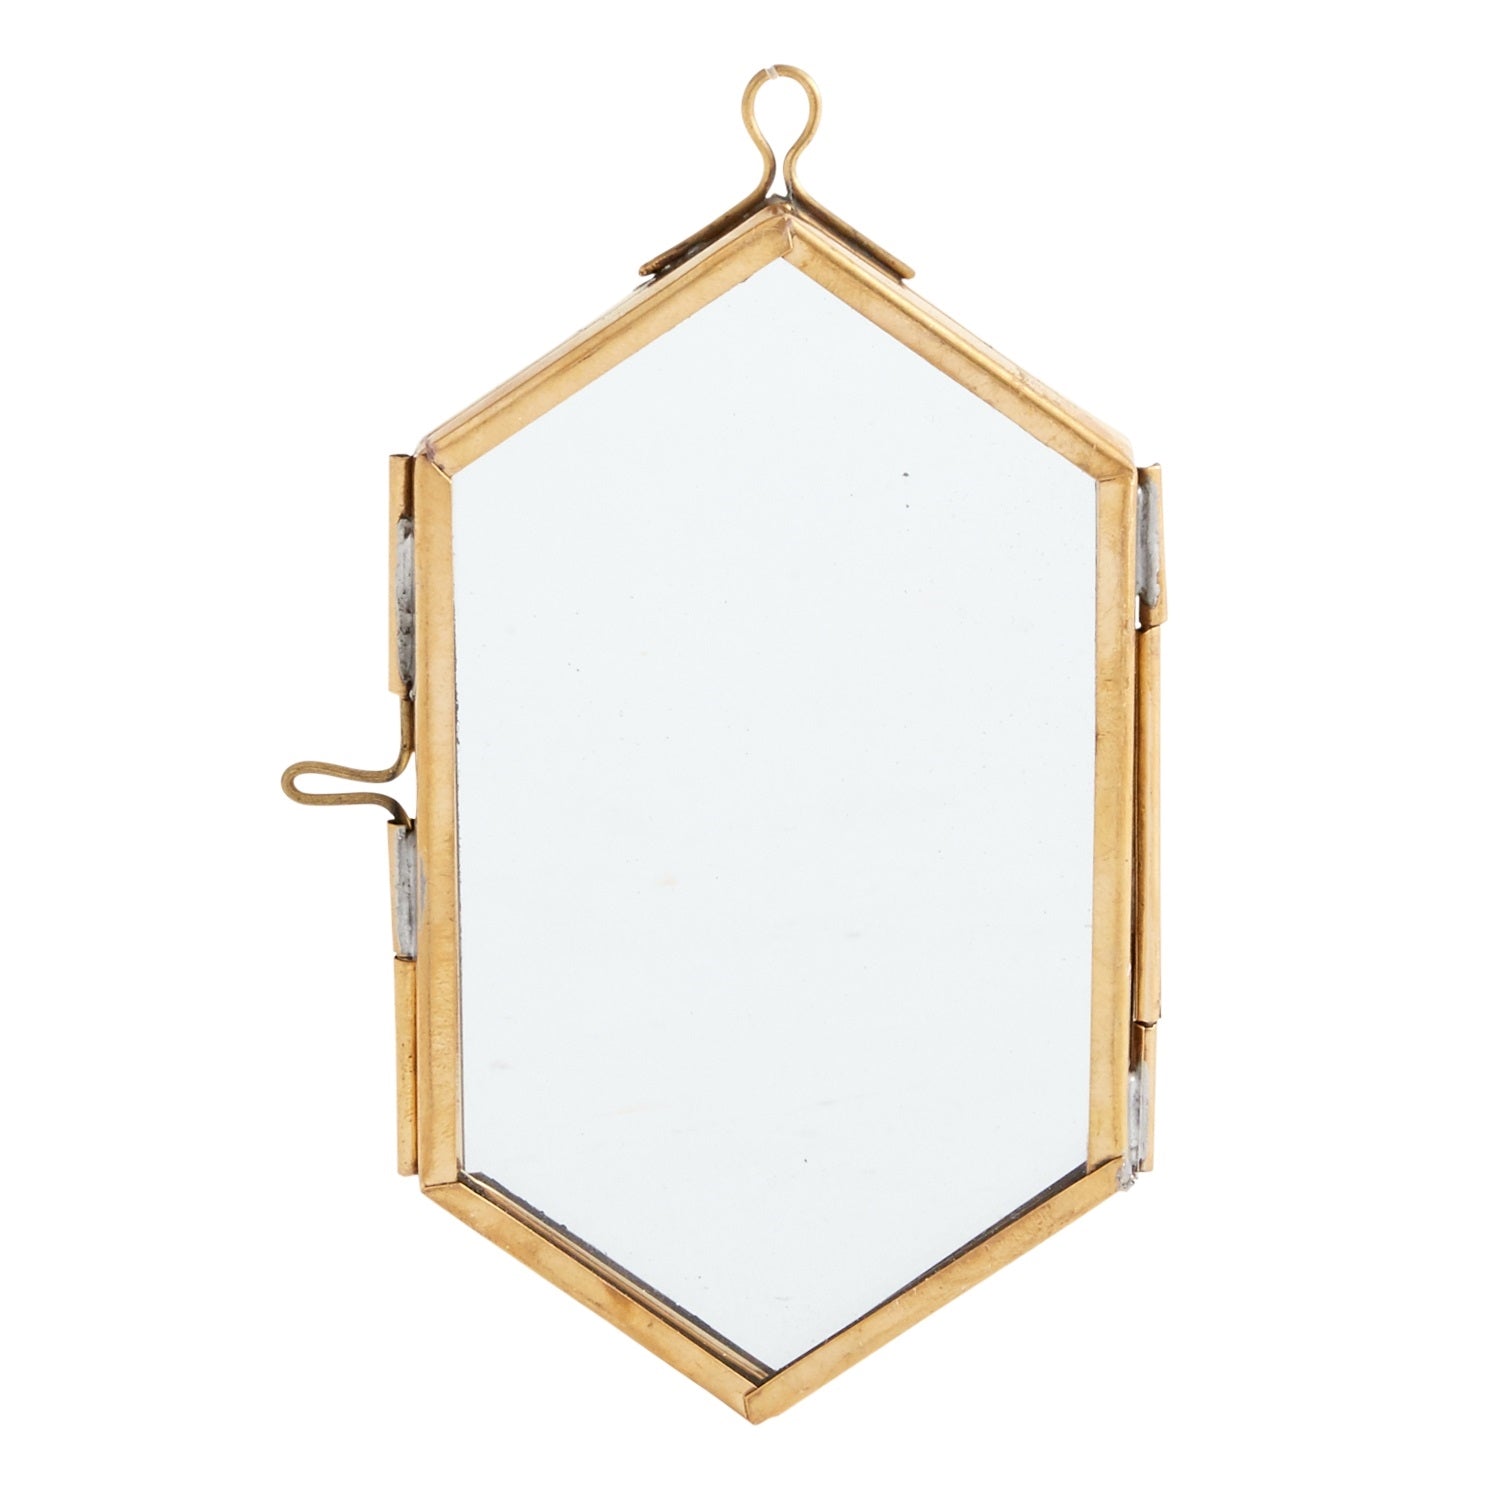 Crissle Hanging Frame | Decor - Lizzie Bee's Flower Shoppe